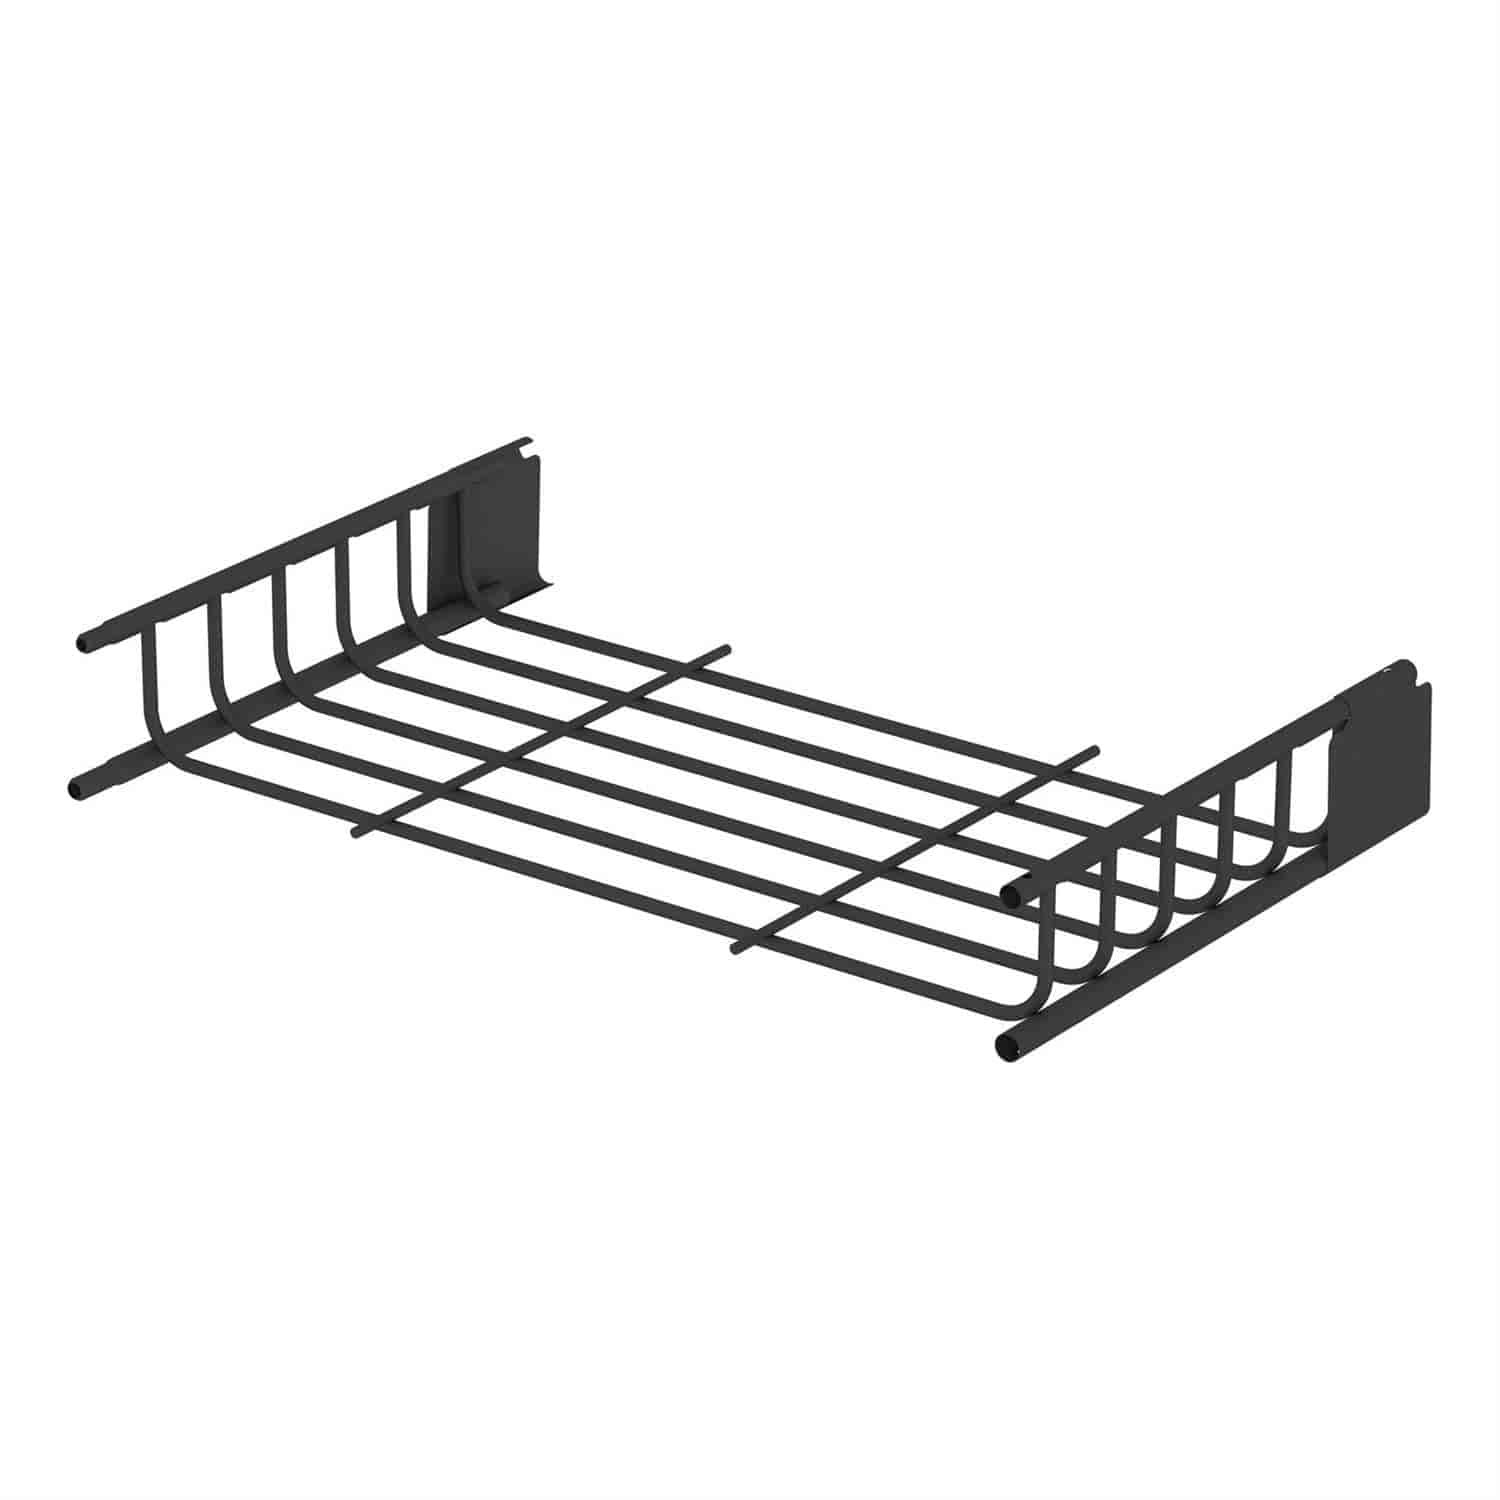 Roof Mounted Cargo Rack Extension 21 in. x 37 in. x 4 in.